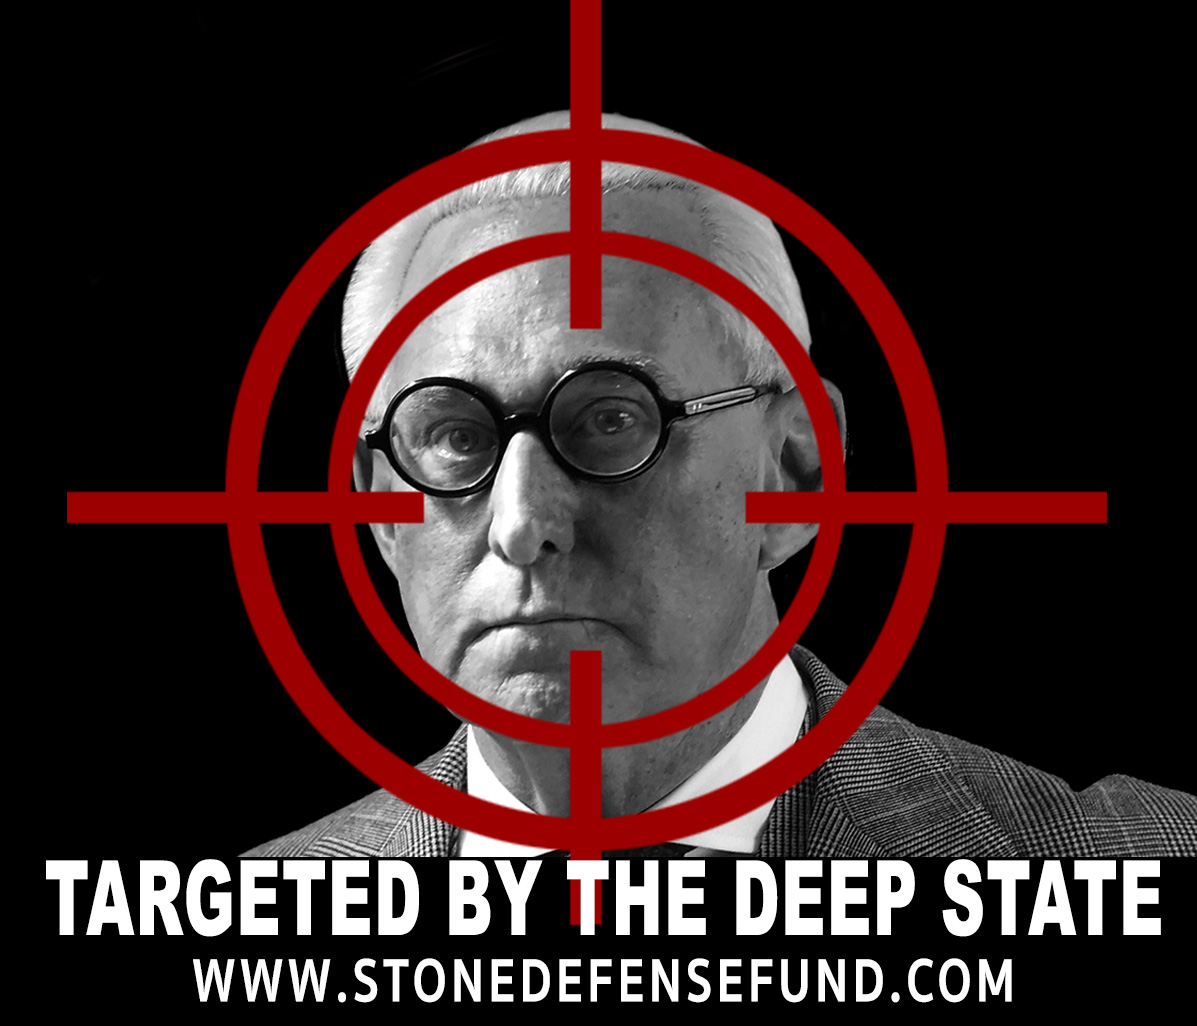 Conviction of Roger Stone is the “tipping point for tyranny” as Americans realize the whole system is rigged, dishonest and DANGEROUS to us all